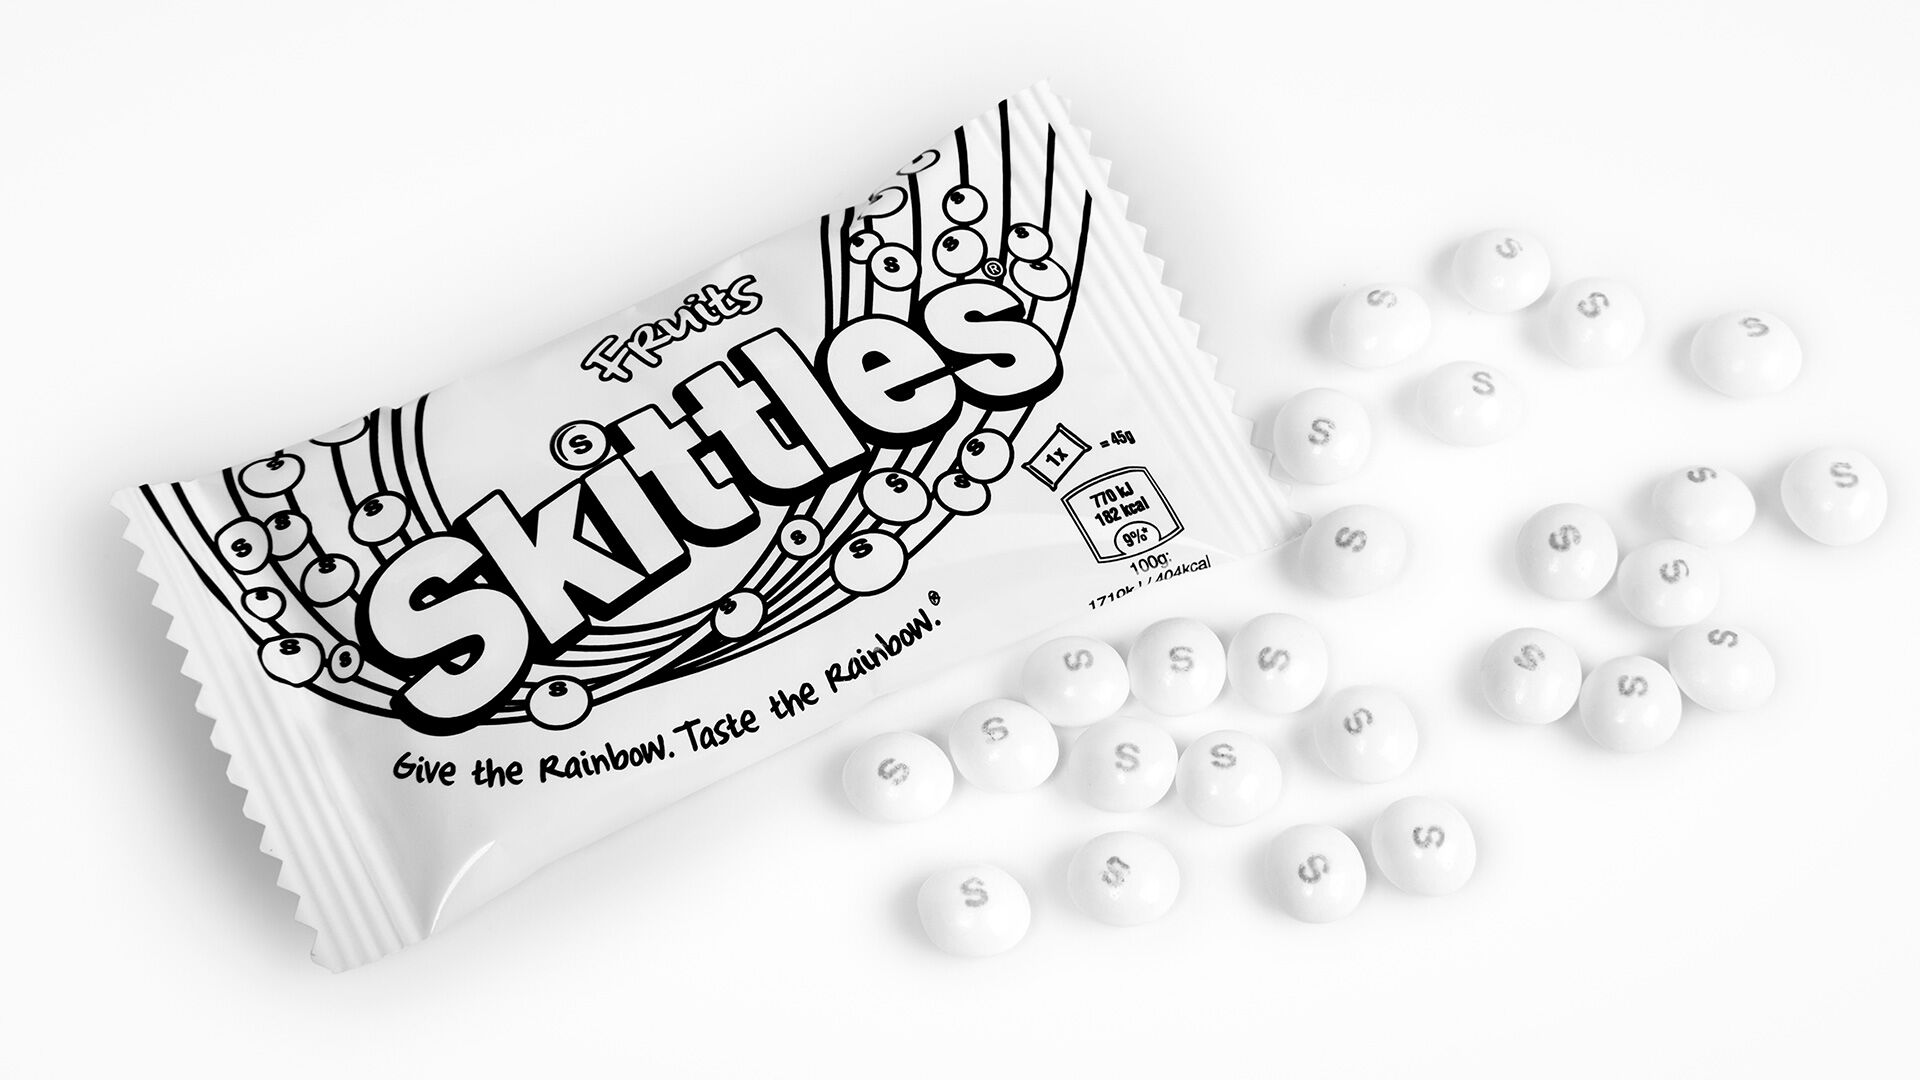 Skittles celebrates Pride Month with a nod to the only rainbow that matters